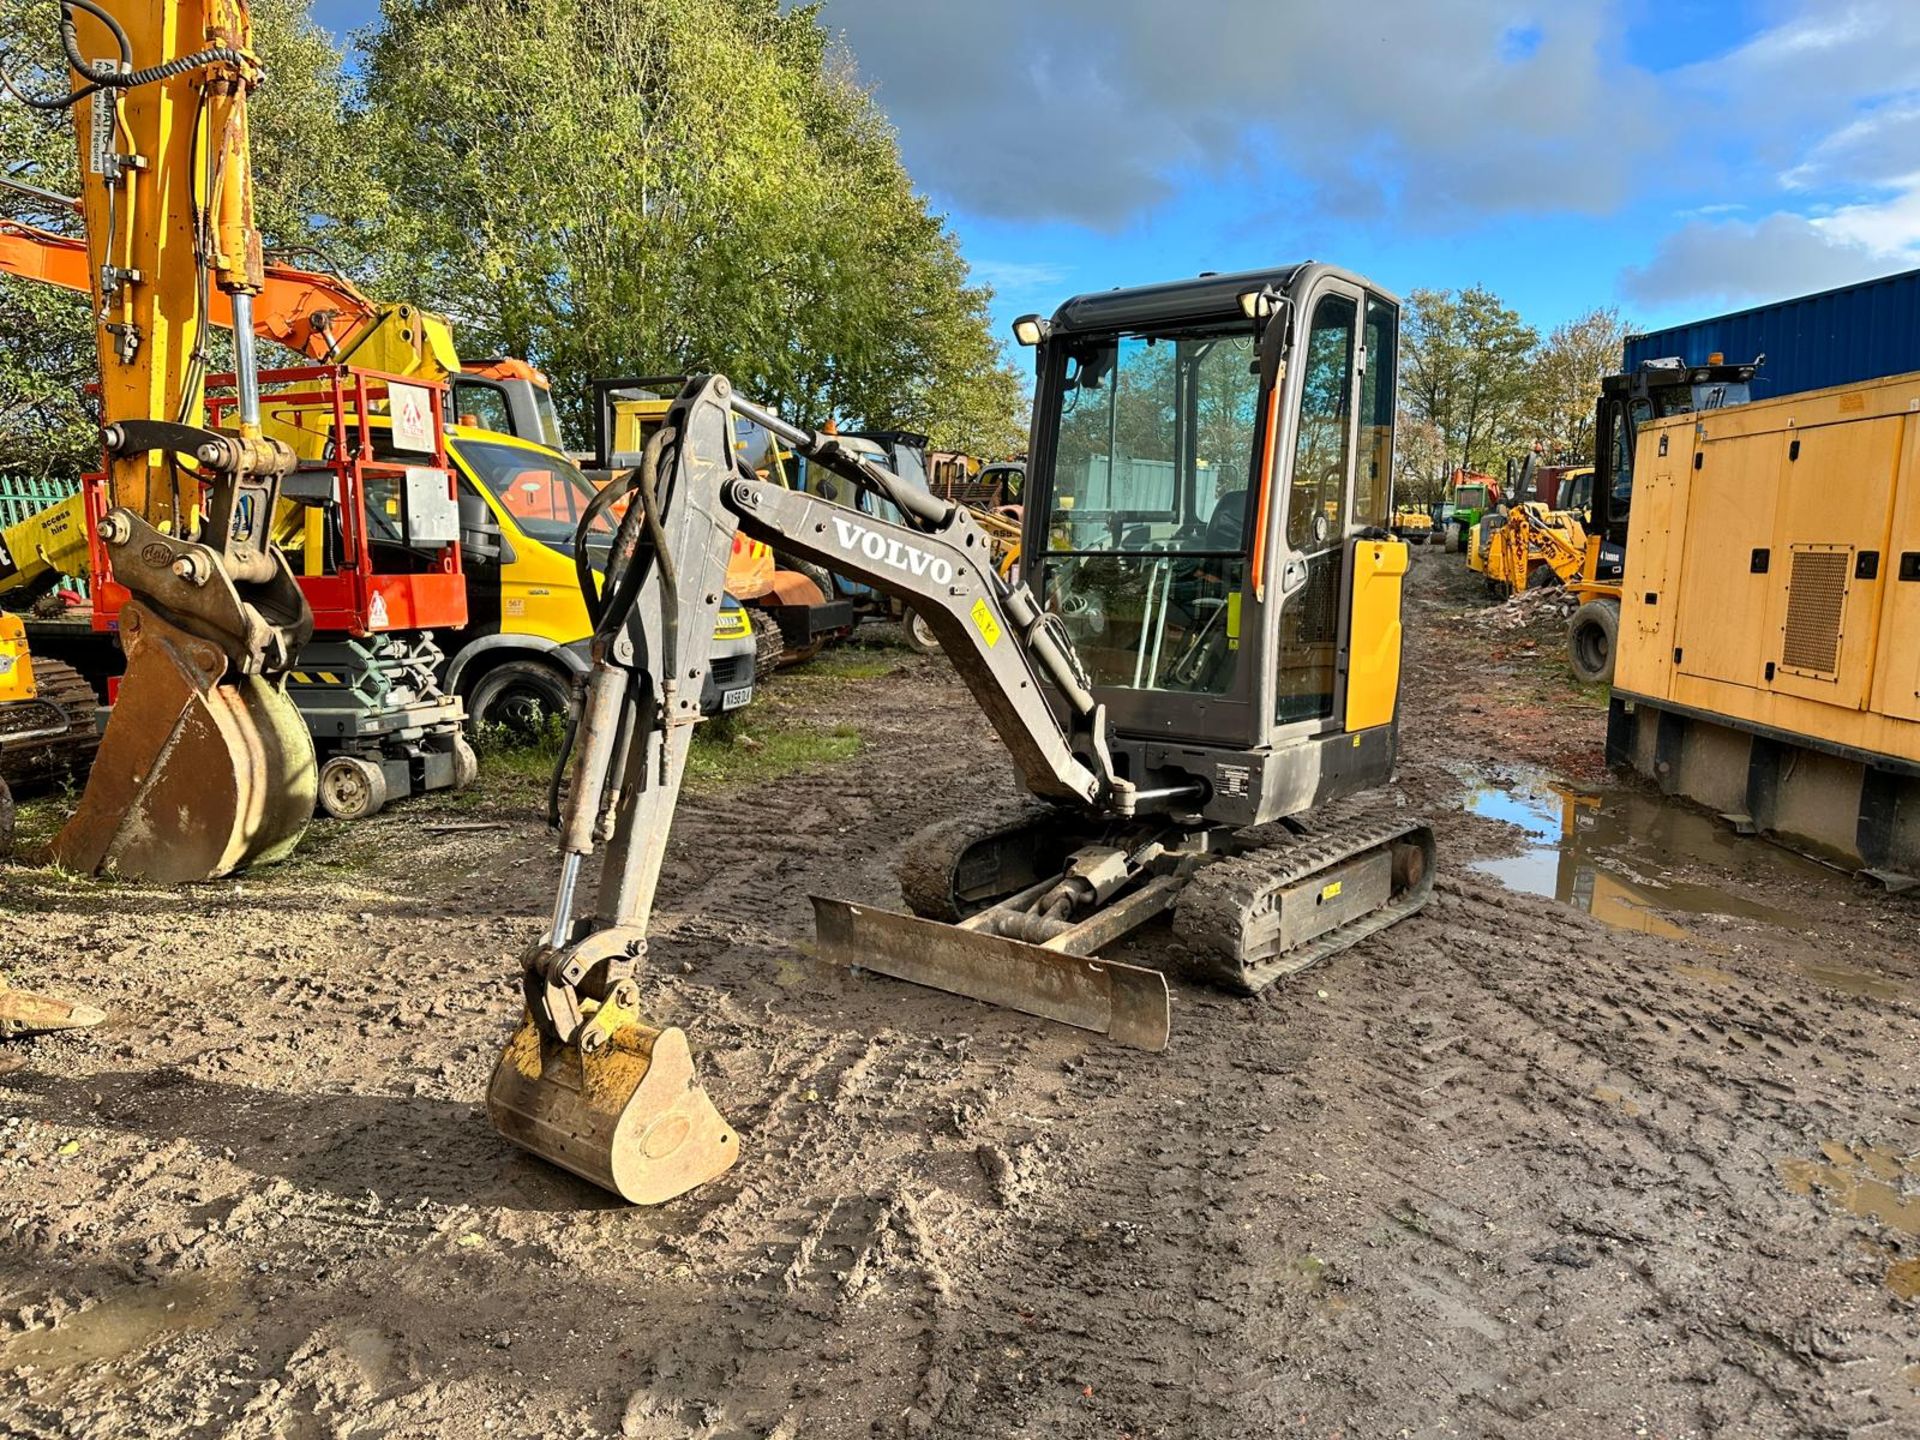 2018 VOLVO EC18E MINI EXCAVATOR - RUNS DRIVES AND WORKS WELL - SHOWING A LOW 1801 HOURS! 